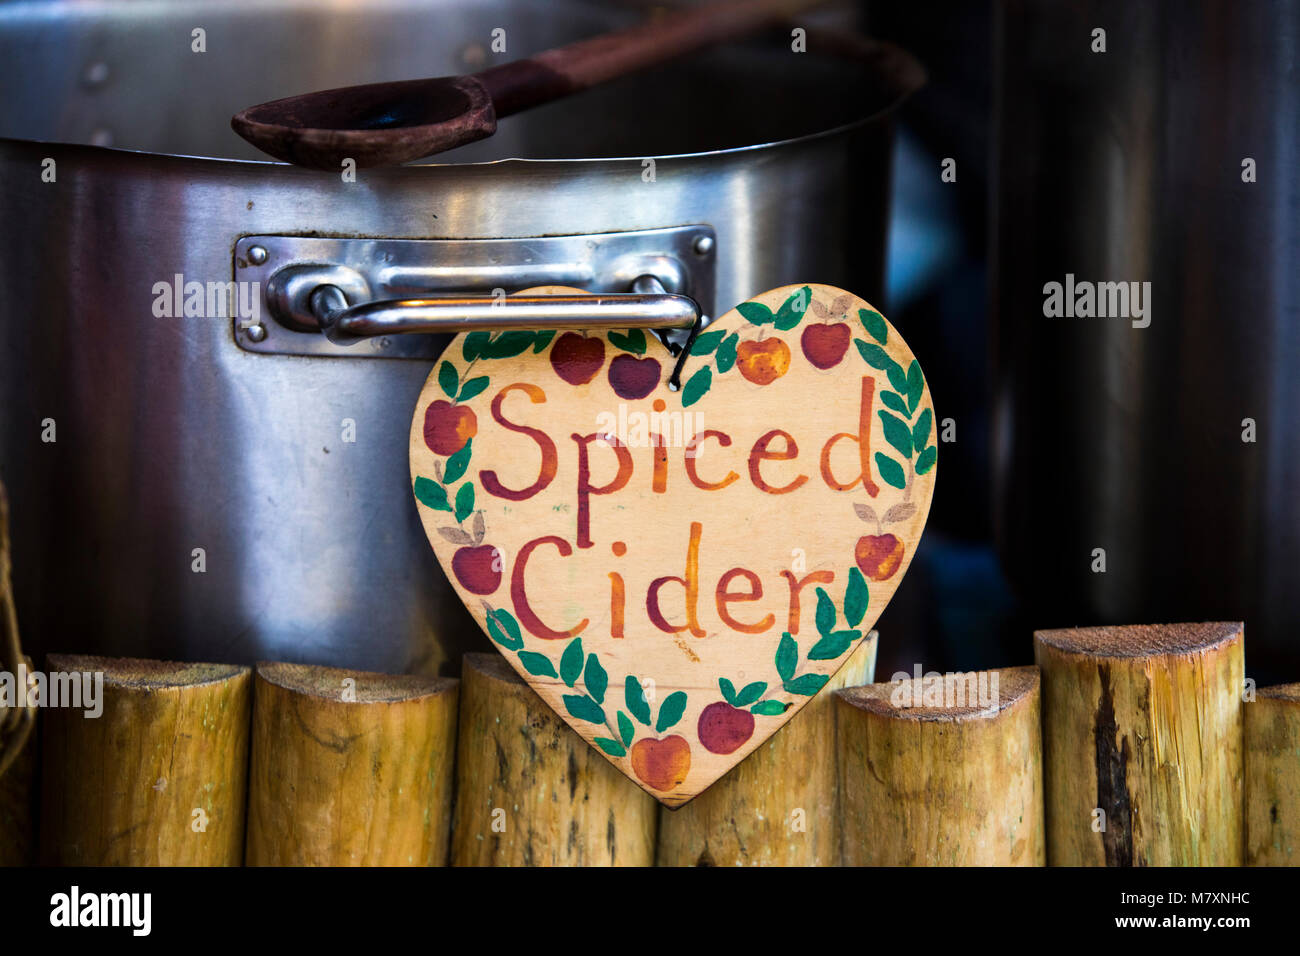 Christmas festive hot drinks on sale at market - spiced cider. Stock Photo